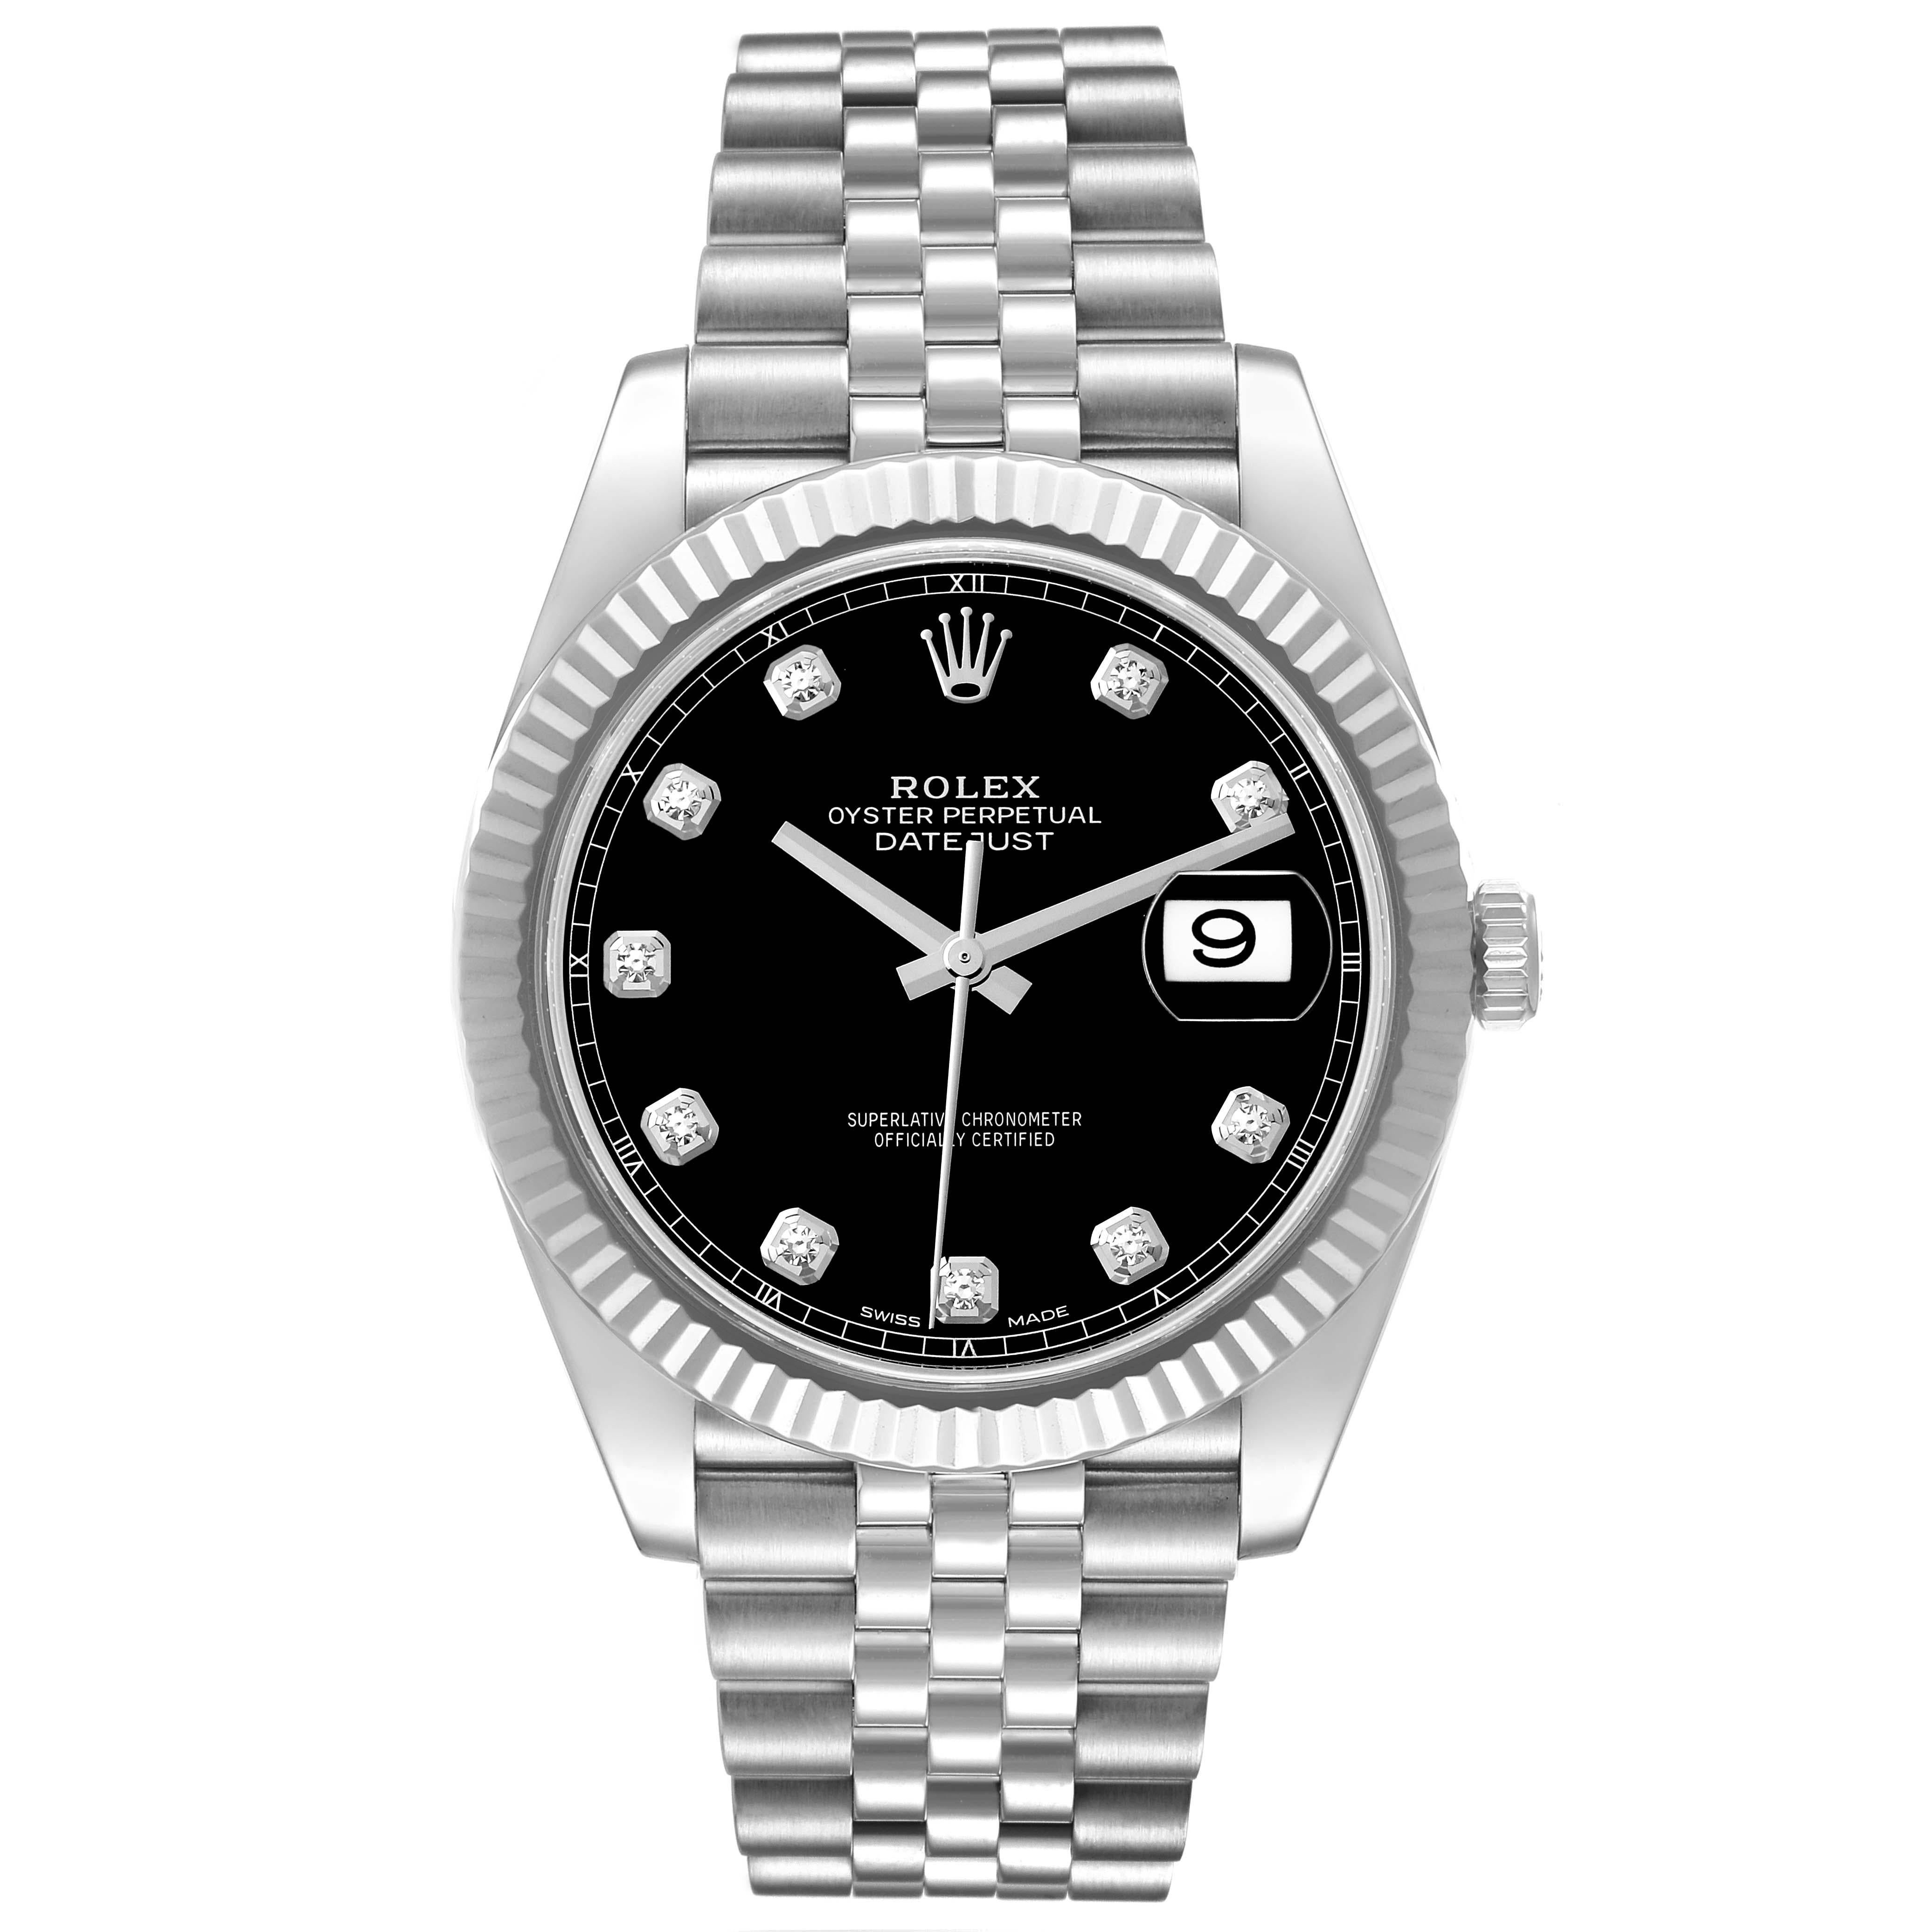 Rolex Datejust 41 Steel White Gold Black Diamond Dial Mens Watch 126334. Officially certified chronometer automatic self-winding movement. Stainless steel case 41 mm in diameter. Rolex logo on a crown. 18K white gold fluted bezel. Scratch resistant